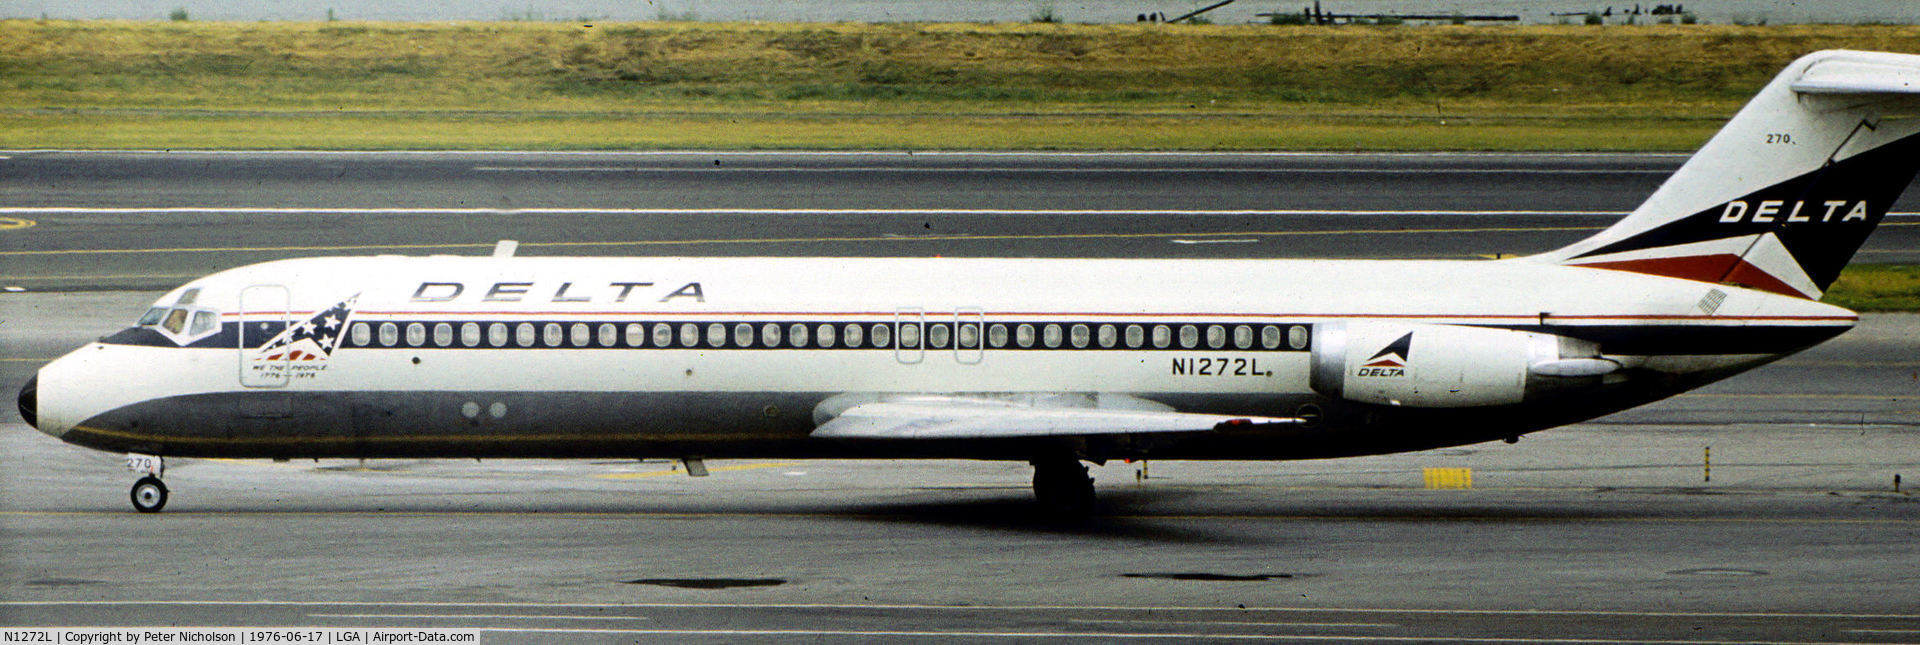 N1272L, 1969 Douglas DC-9-32 C/N 47320, DC-9-32 of Delta Airlines preparing to depart from La Guardia in the Summer of 1976.